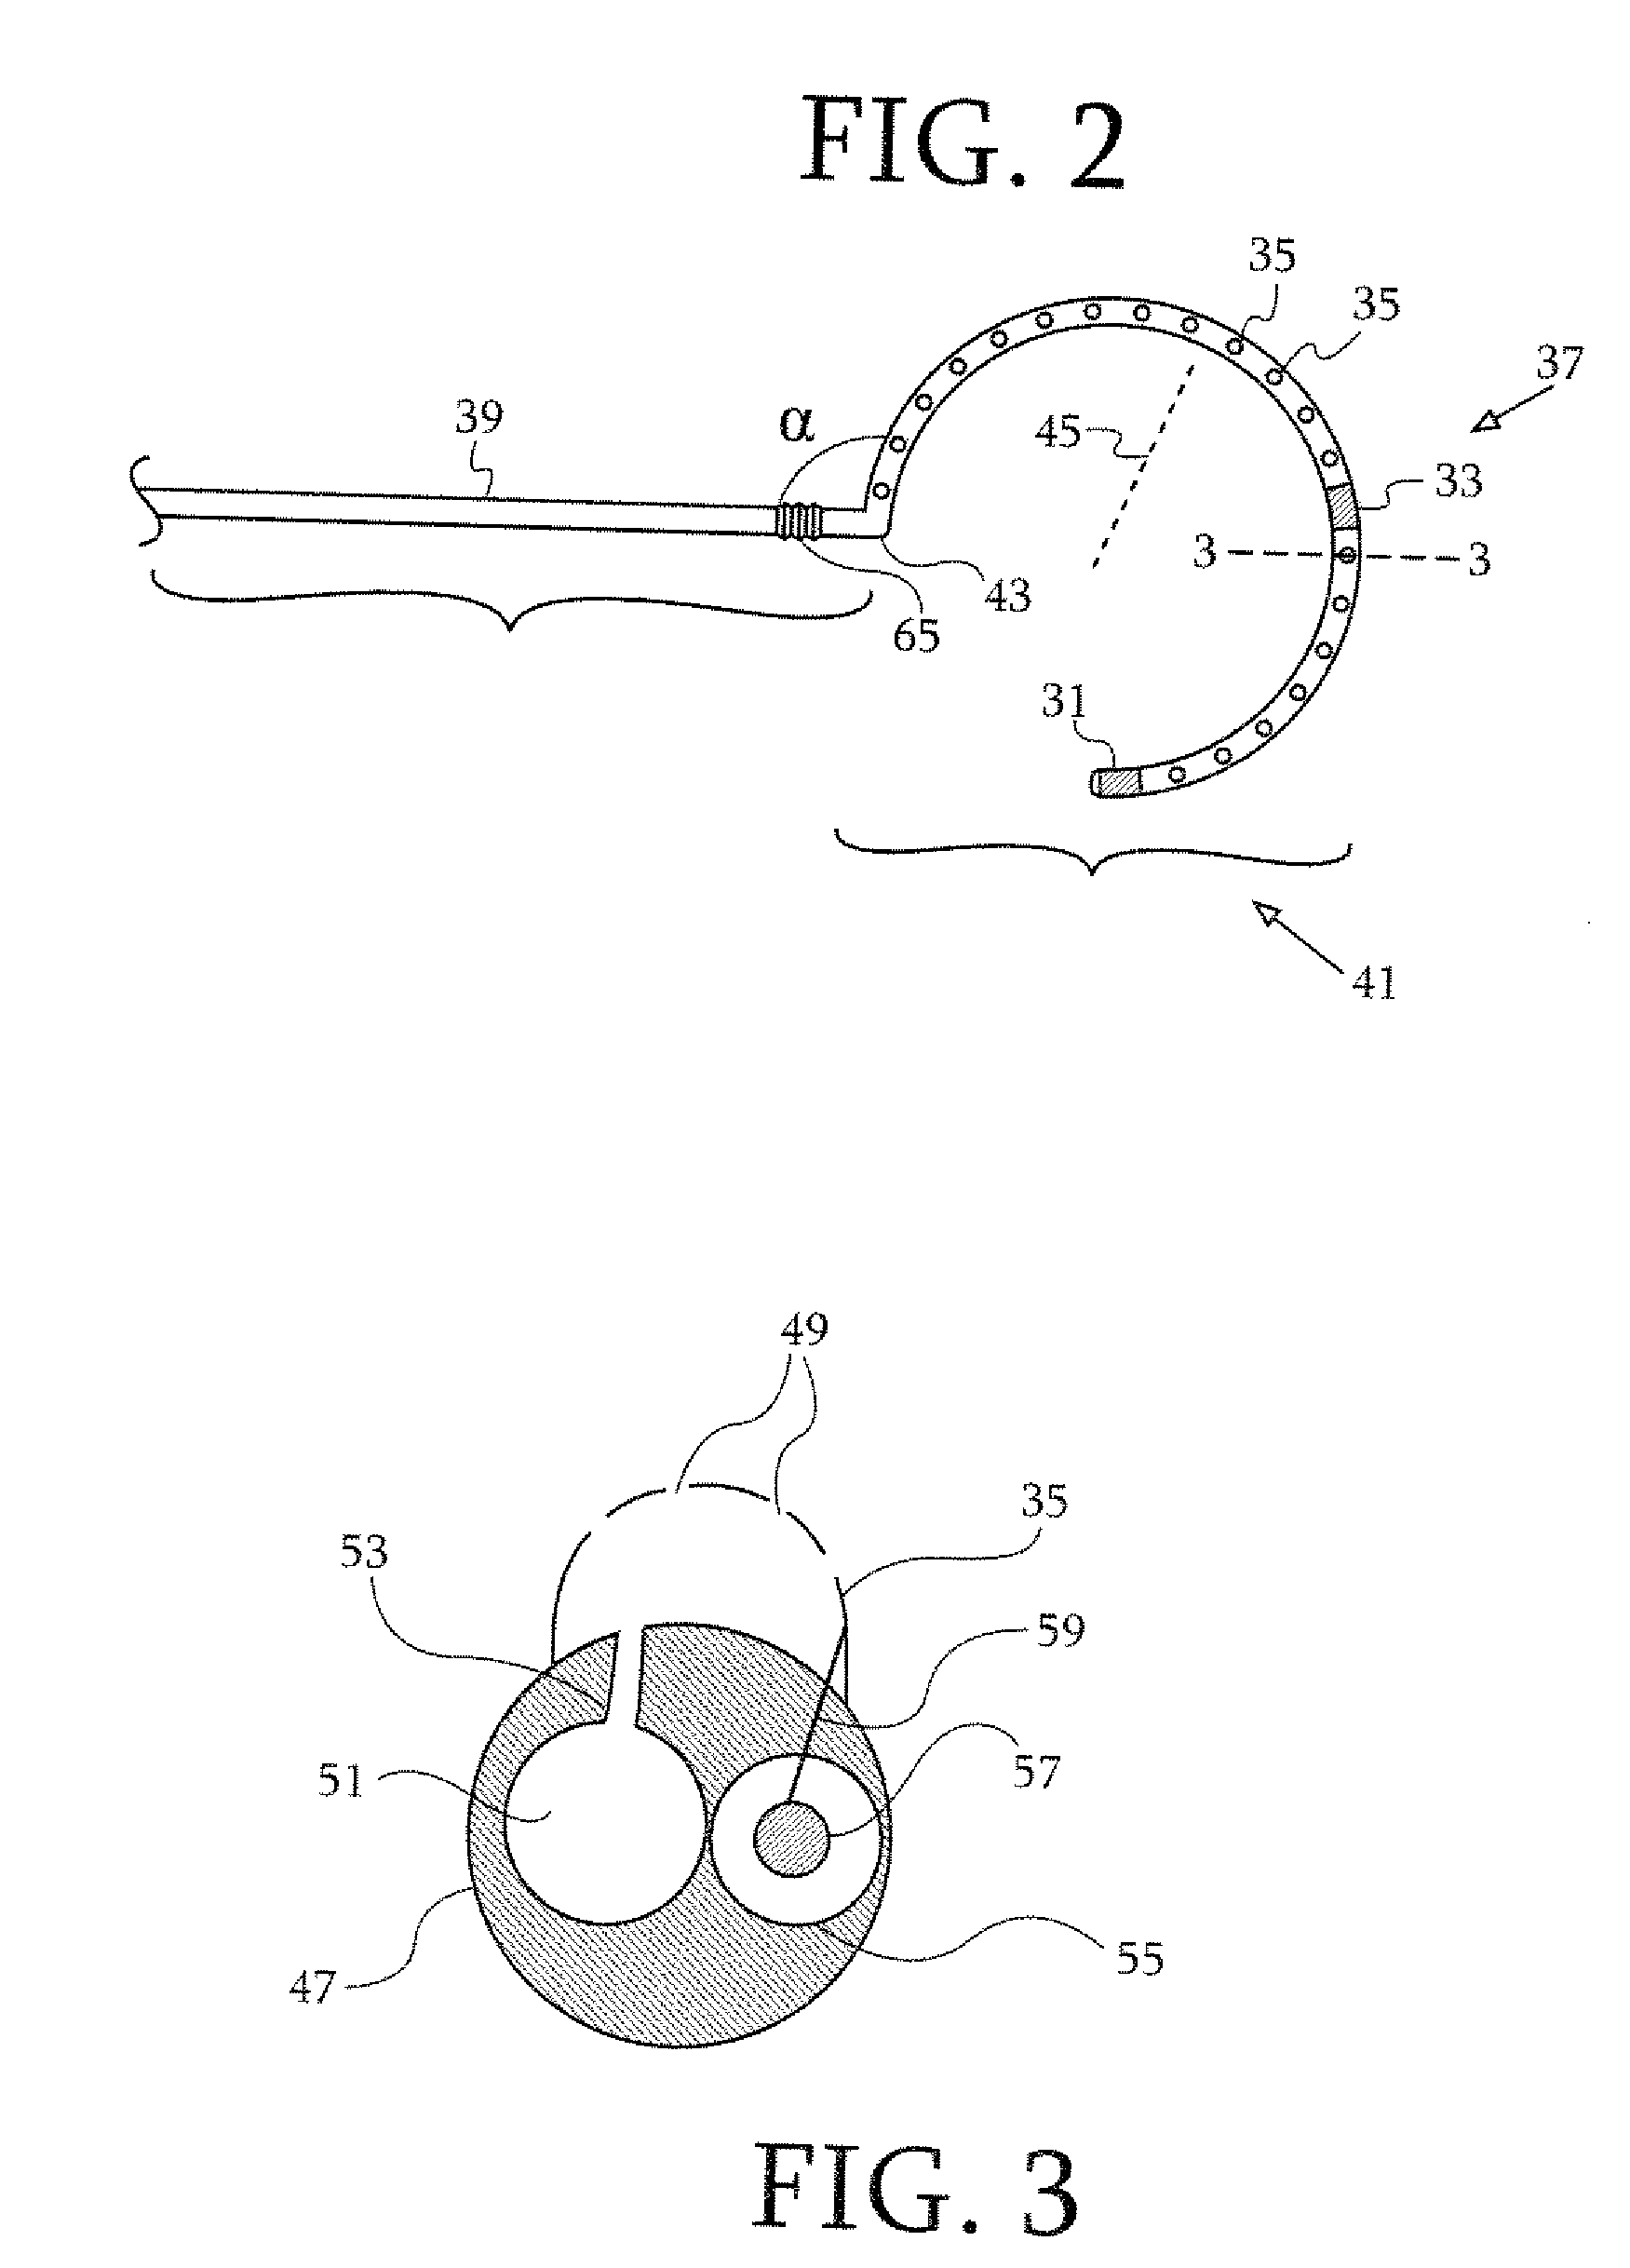 Dual-purpose lasso catheter with irrigation using circumferentially arranged ring bump electrodes